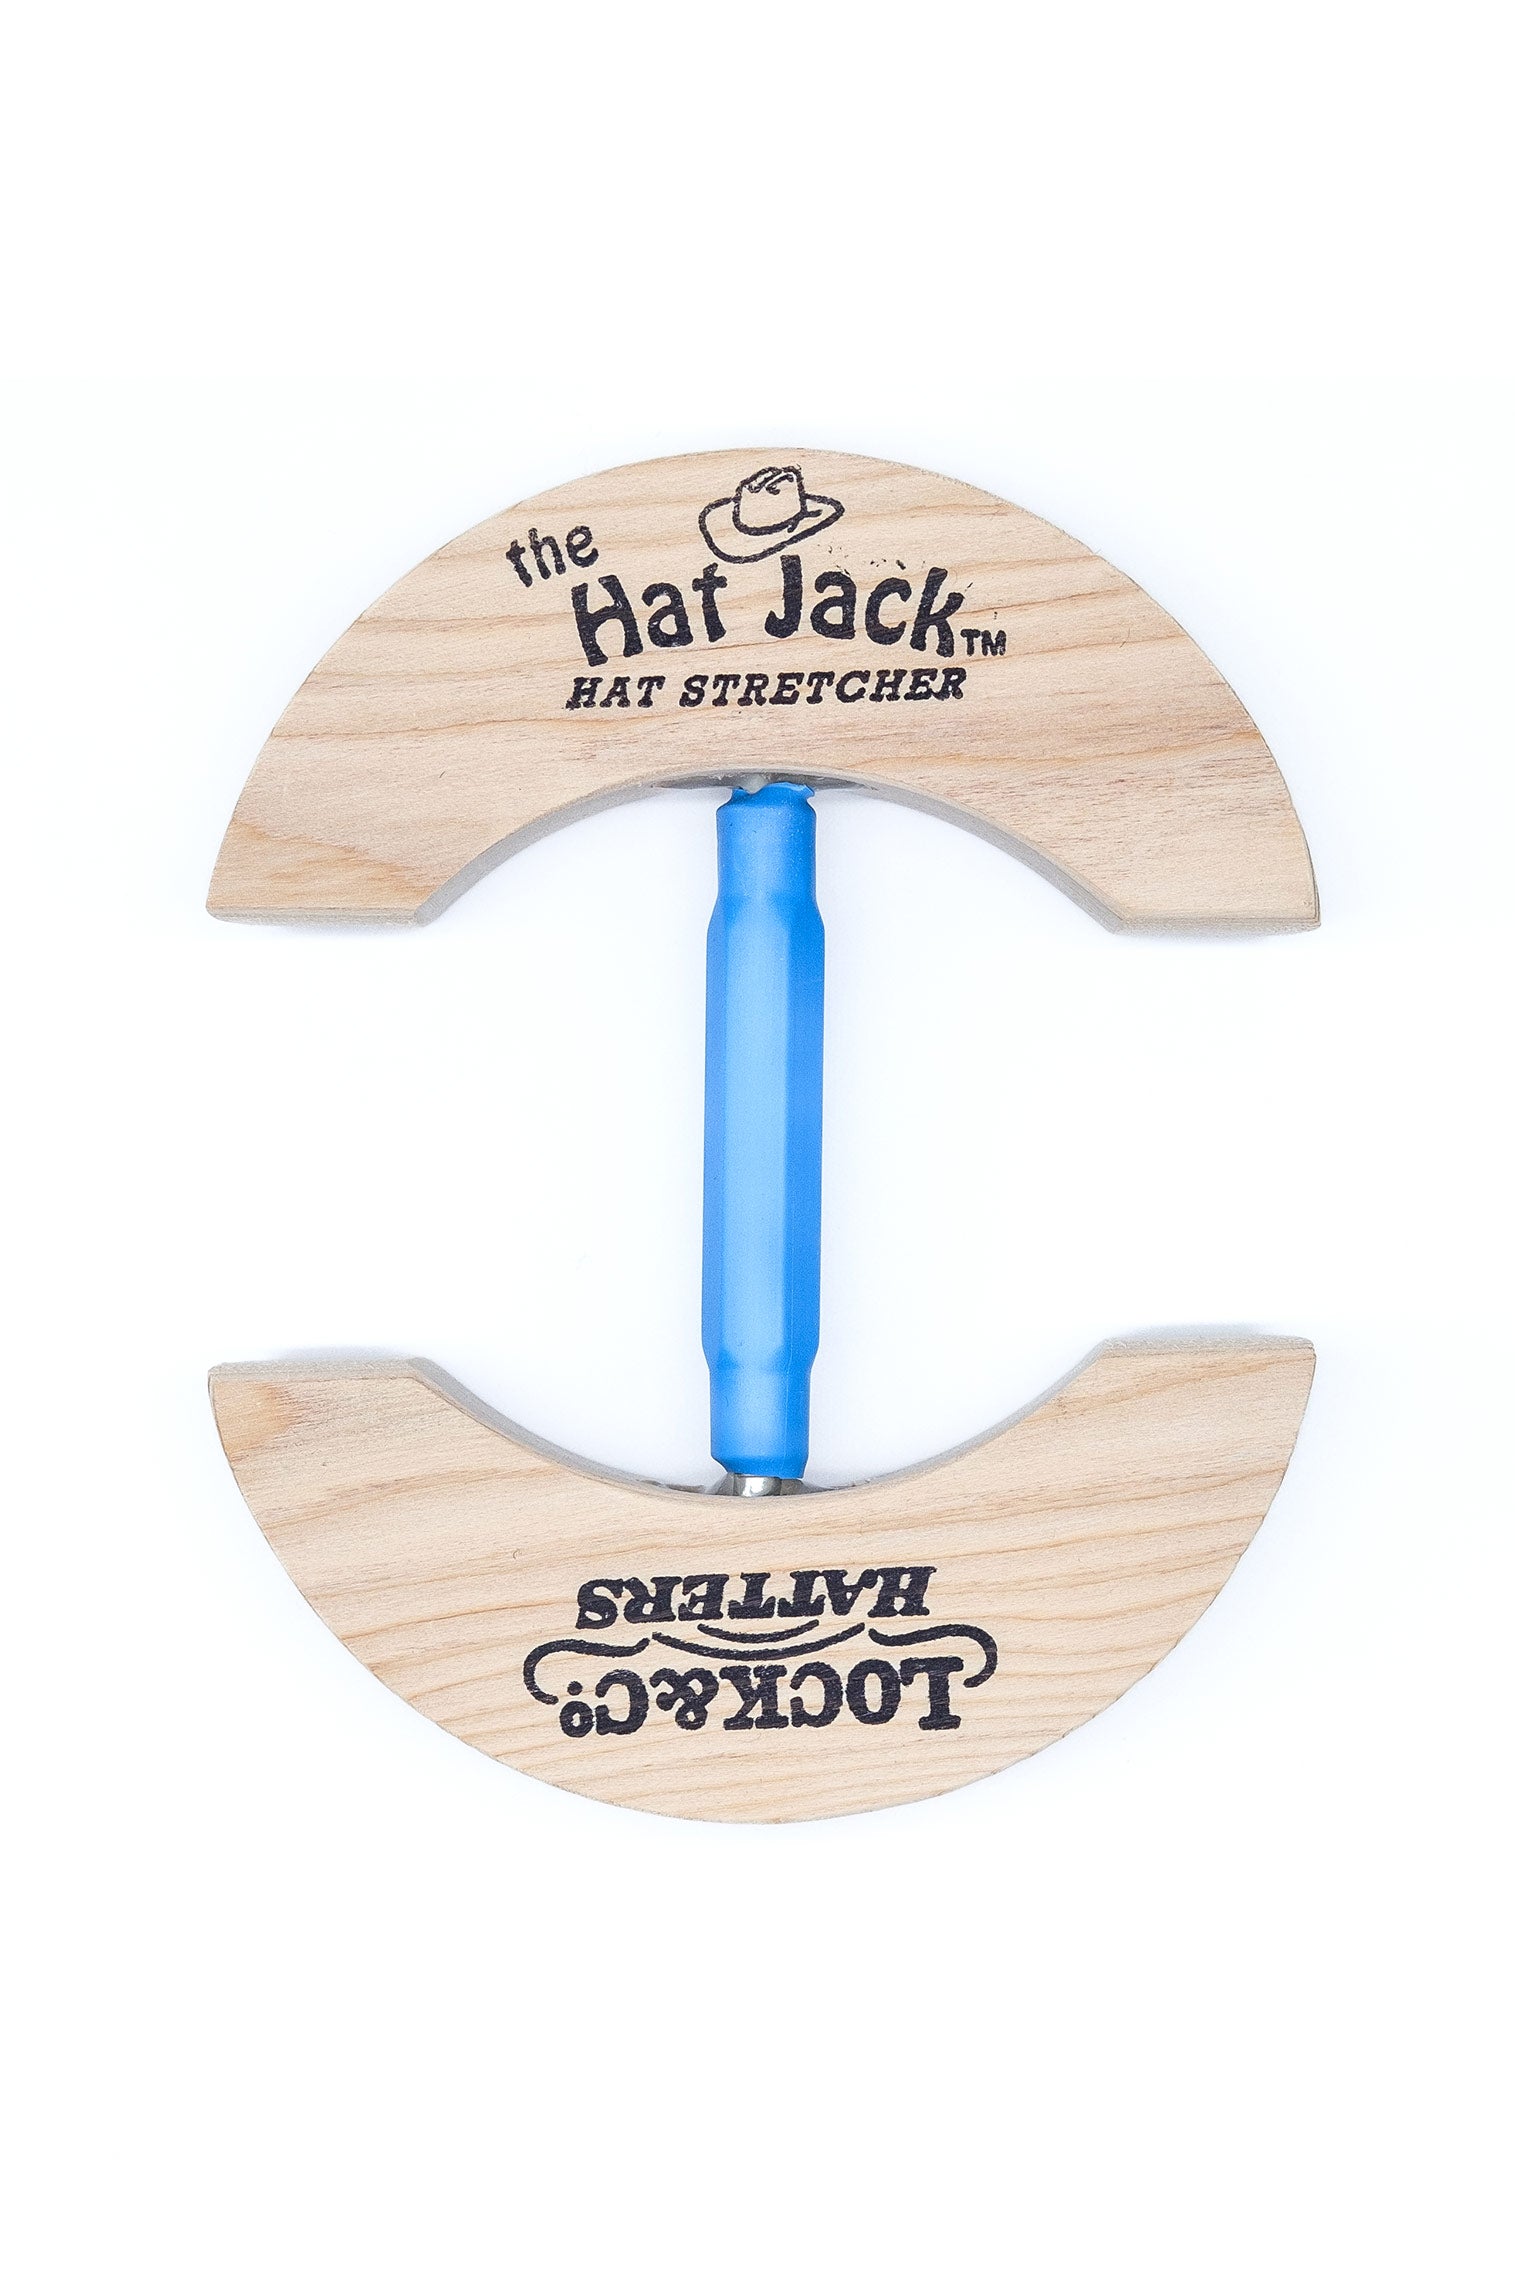 Hat Jack - Mother's Day Gift Guide - Lock & Co. Hatters London UK